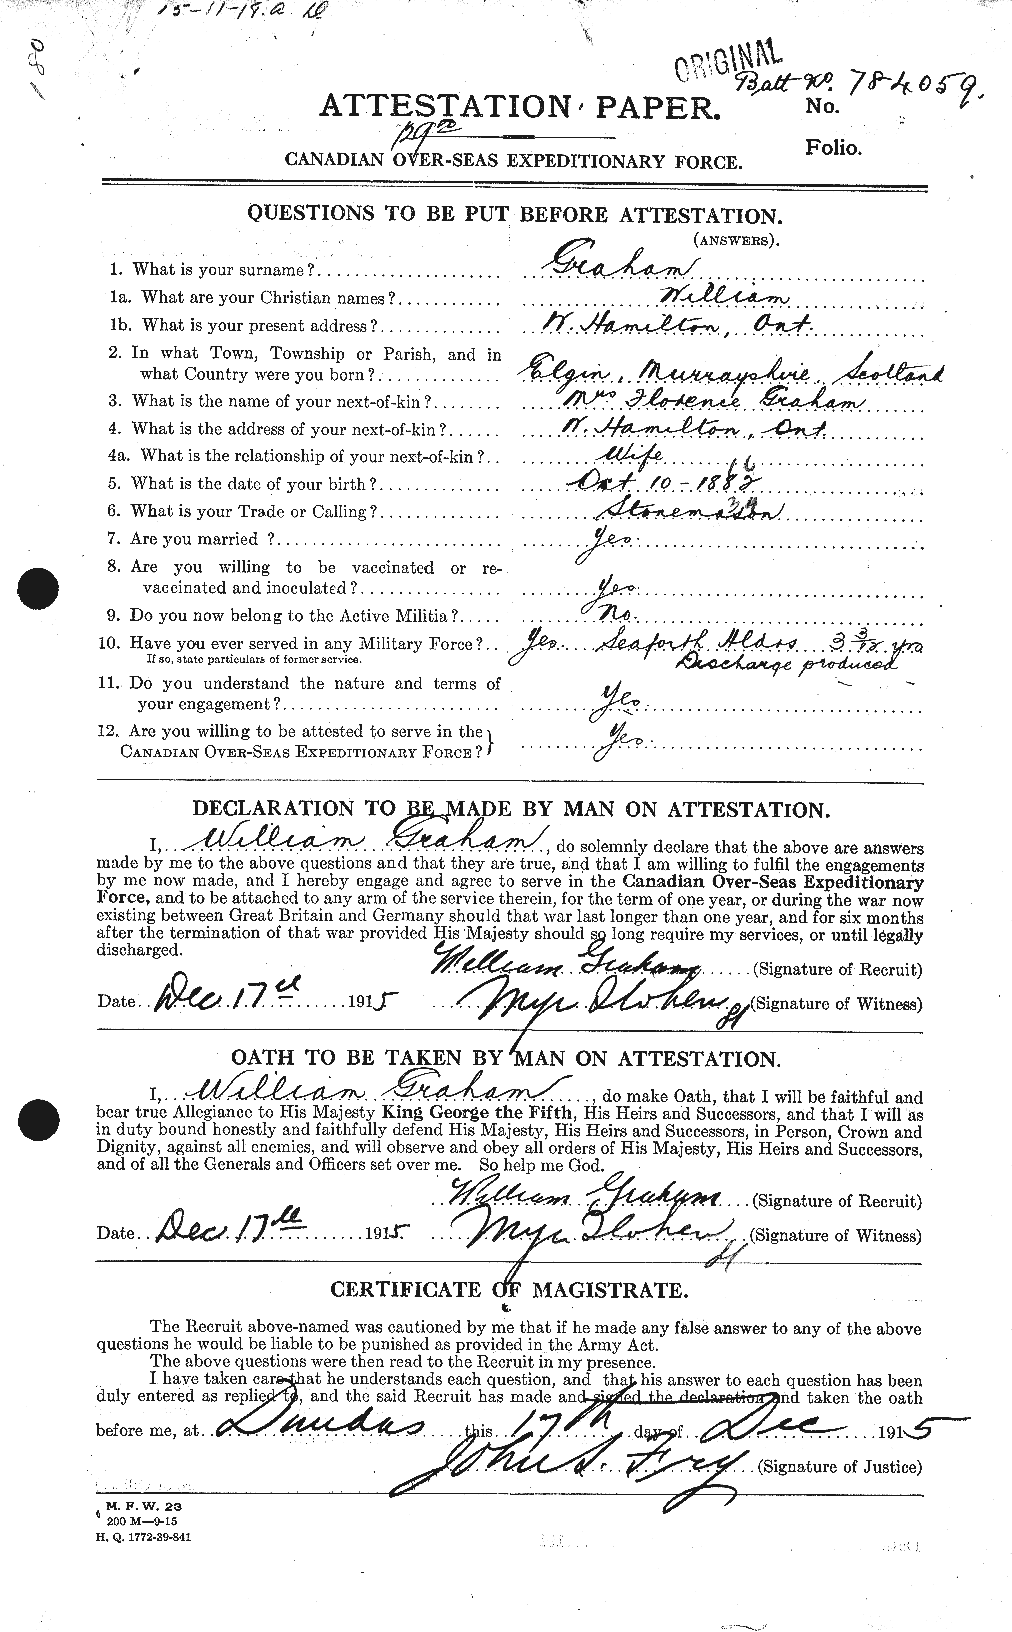 Personnel Records of the First World War - CEF 362698a